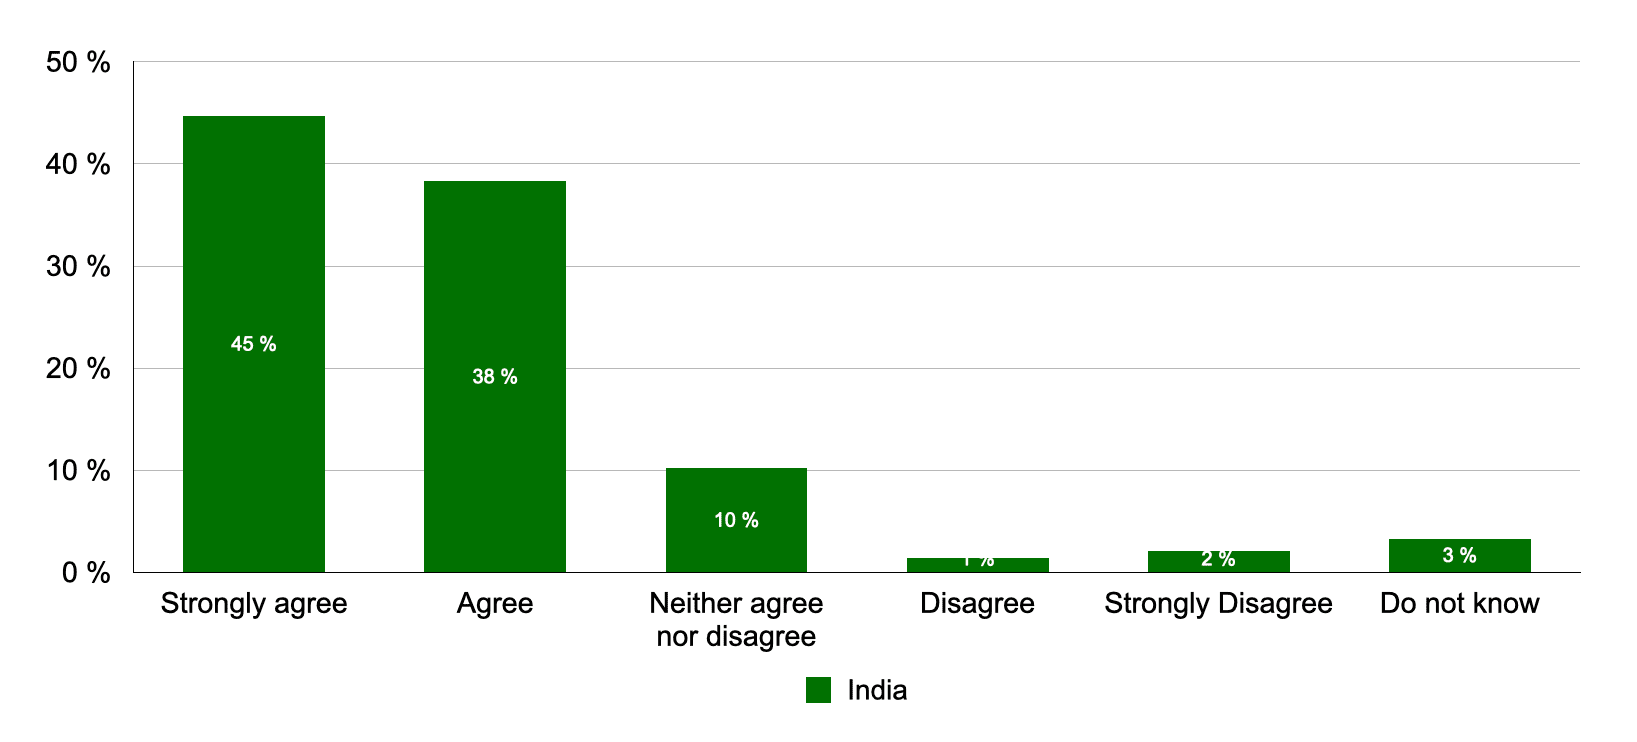 Strongly agree: 45%, Agree: 38%, Neither agree nor disagree: 10%, Disagree: 1%, Strongly disagree: 2%, Don't know: 3%